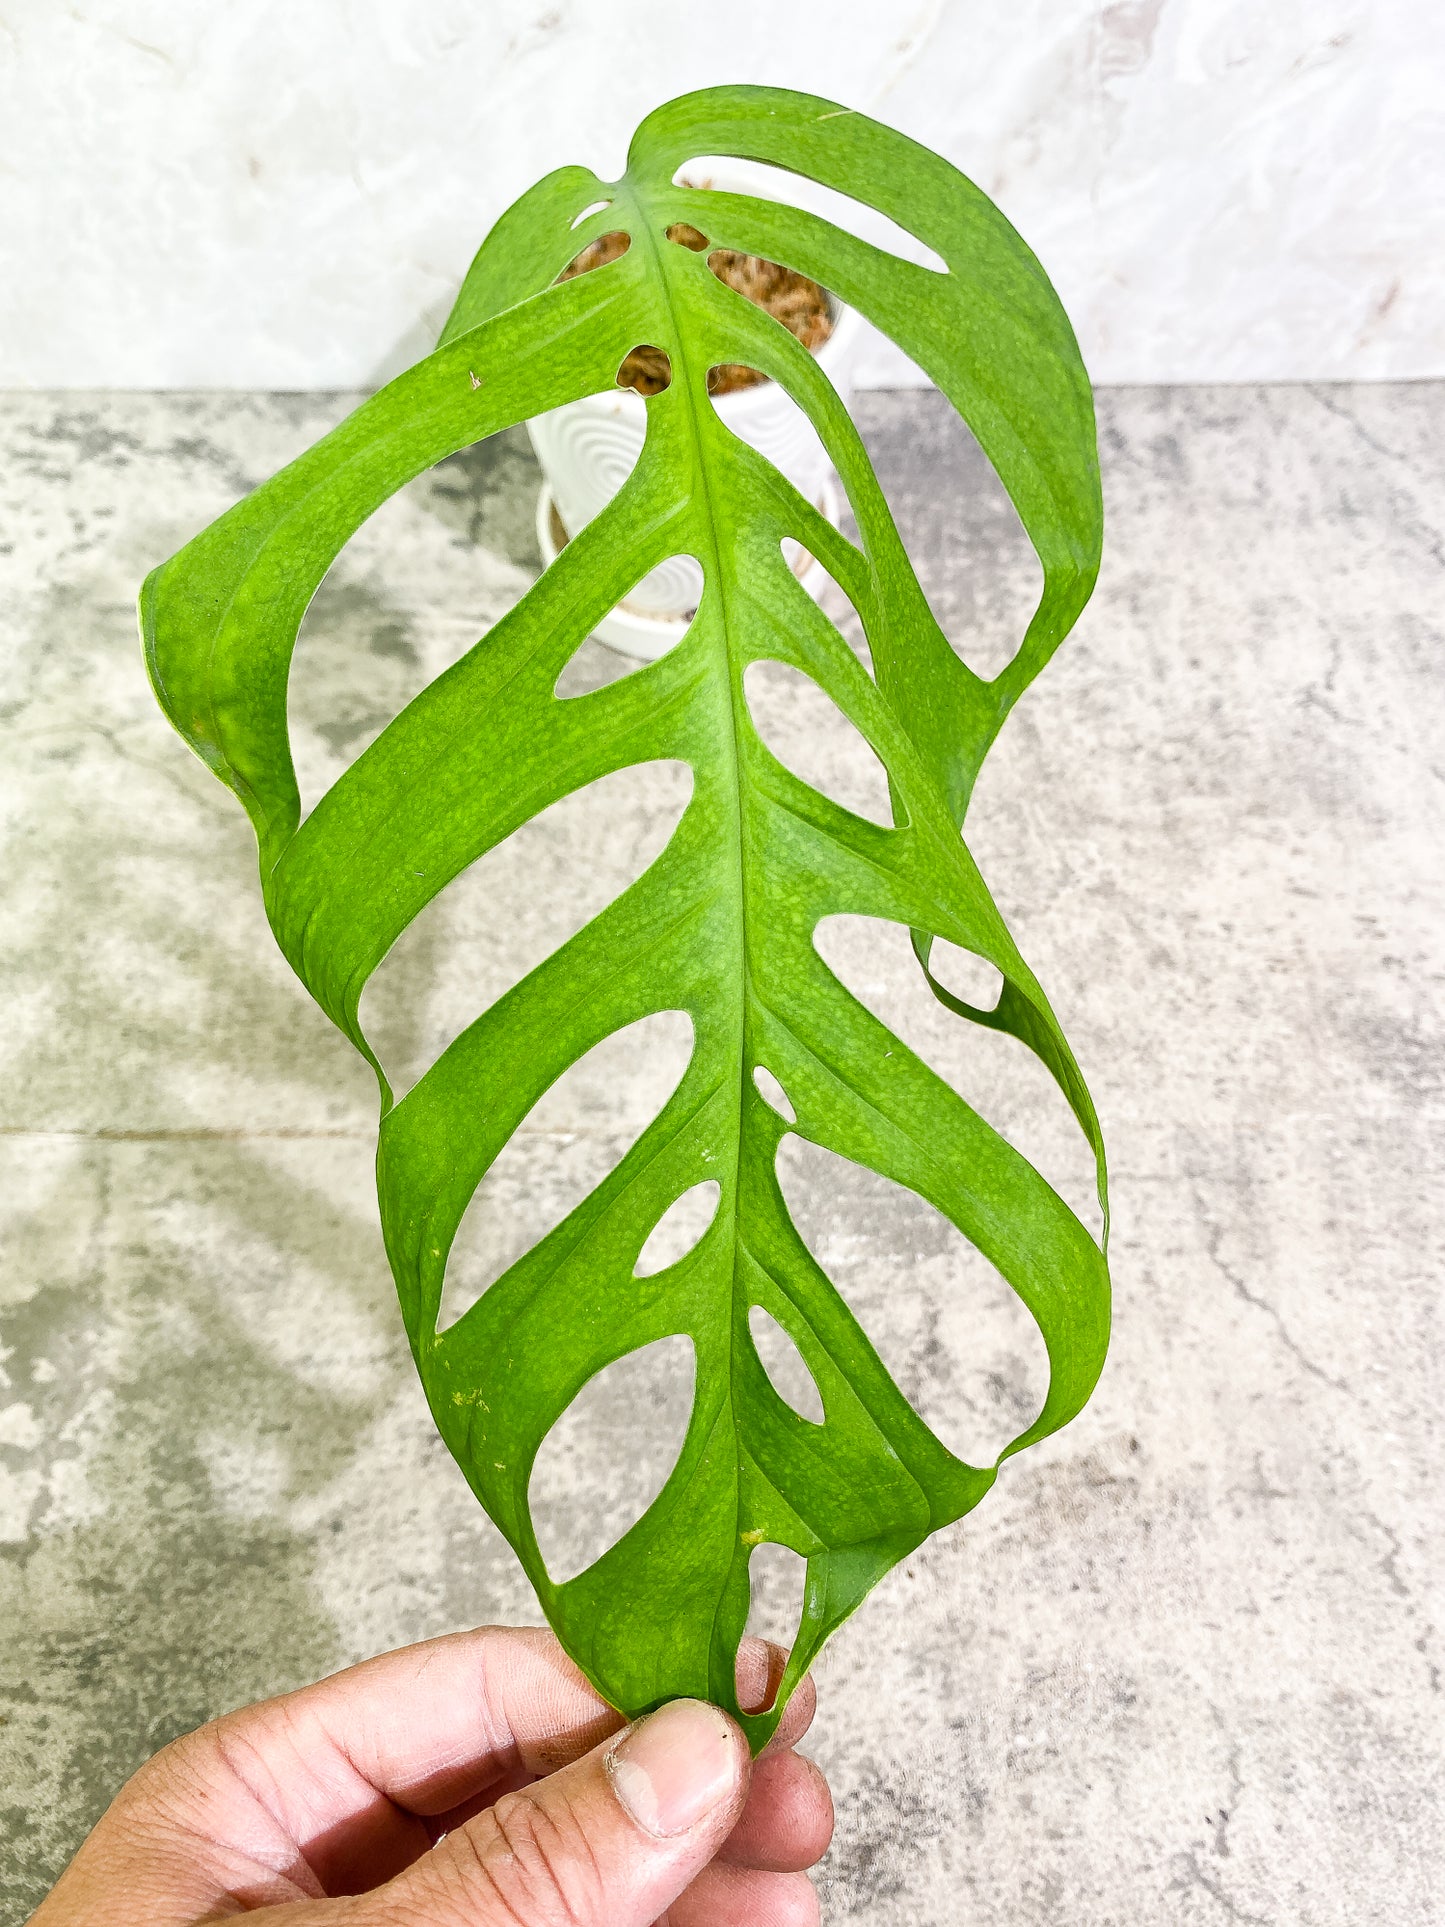 Monstera Esqueleto 1 leaf (11') 1 growing bud rooted